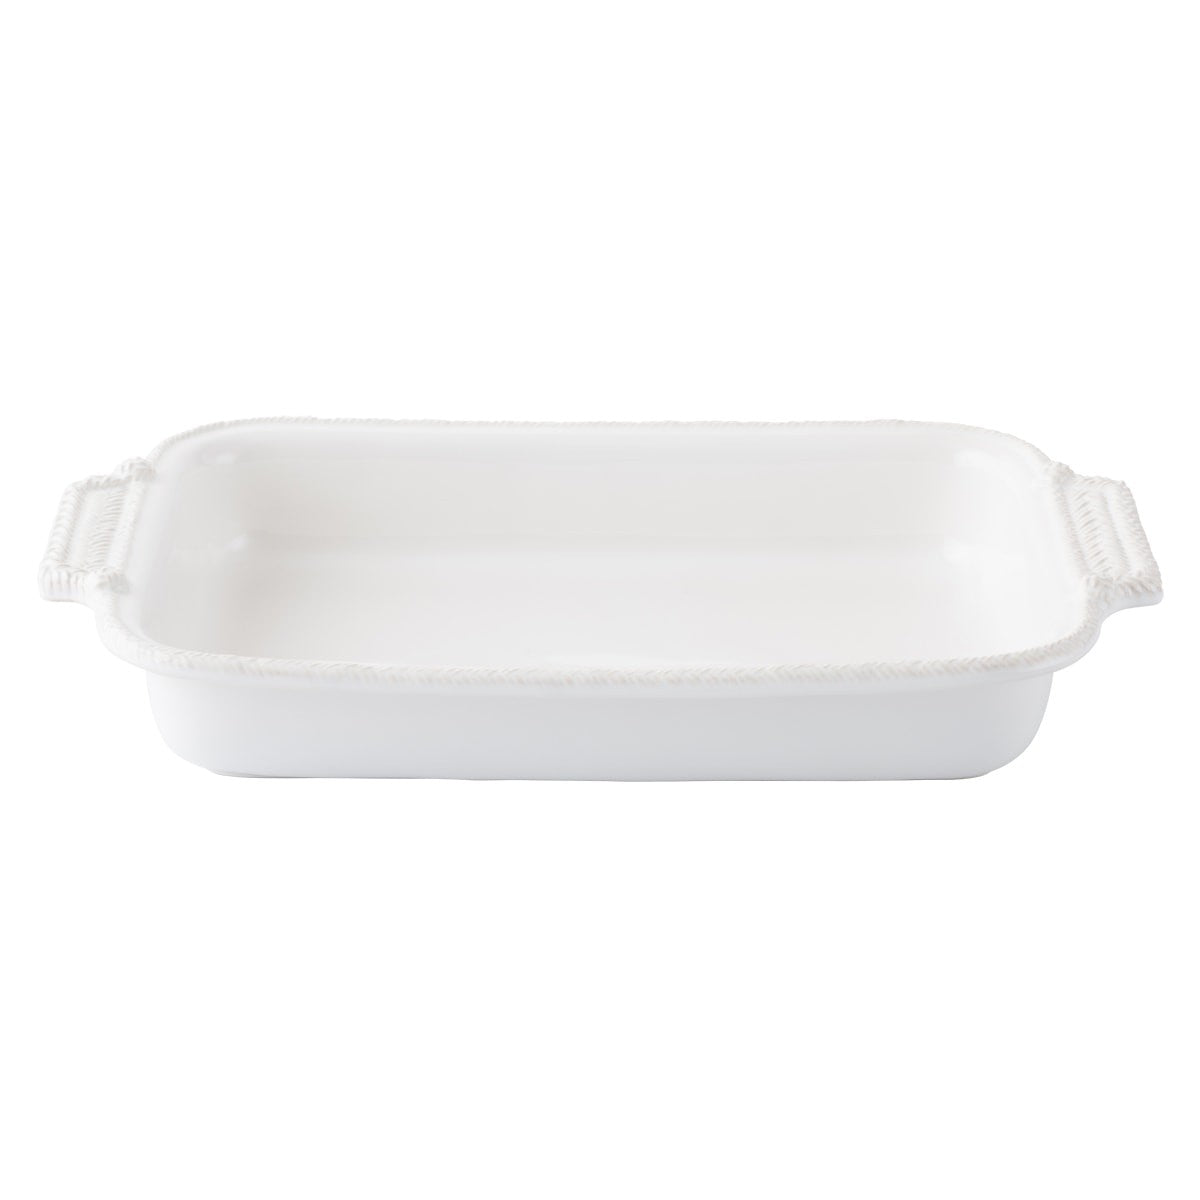 angled view of the le panier rectangle baking dish on a white background 